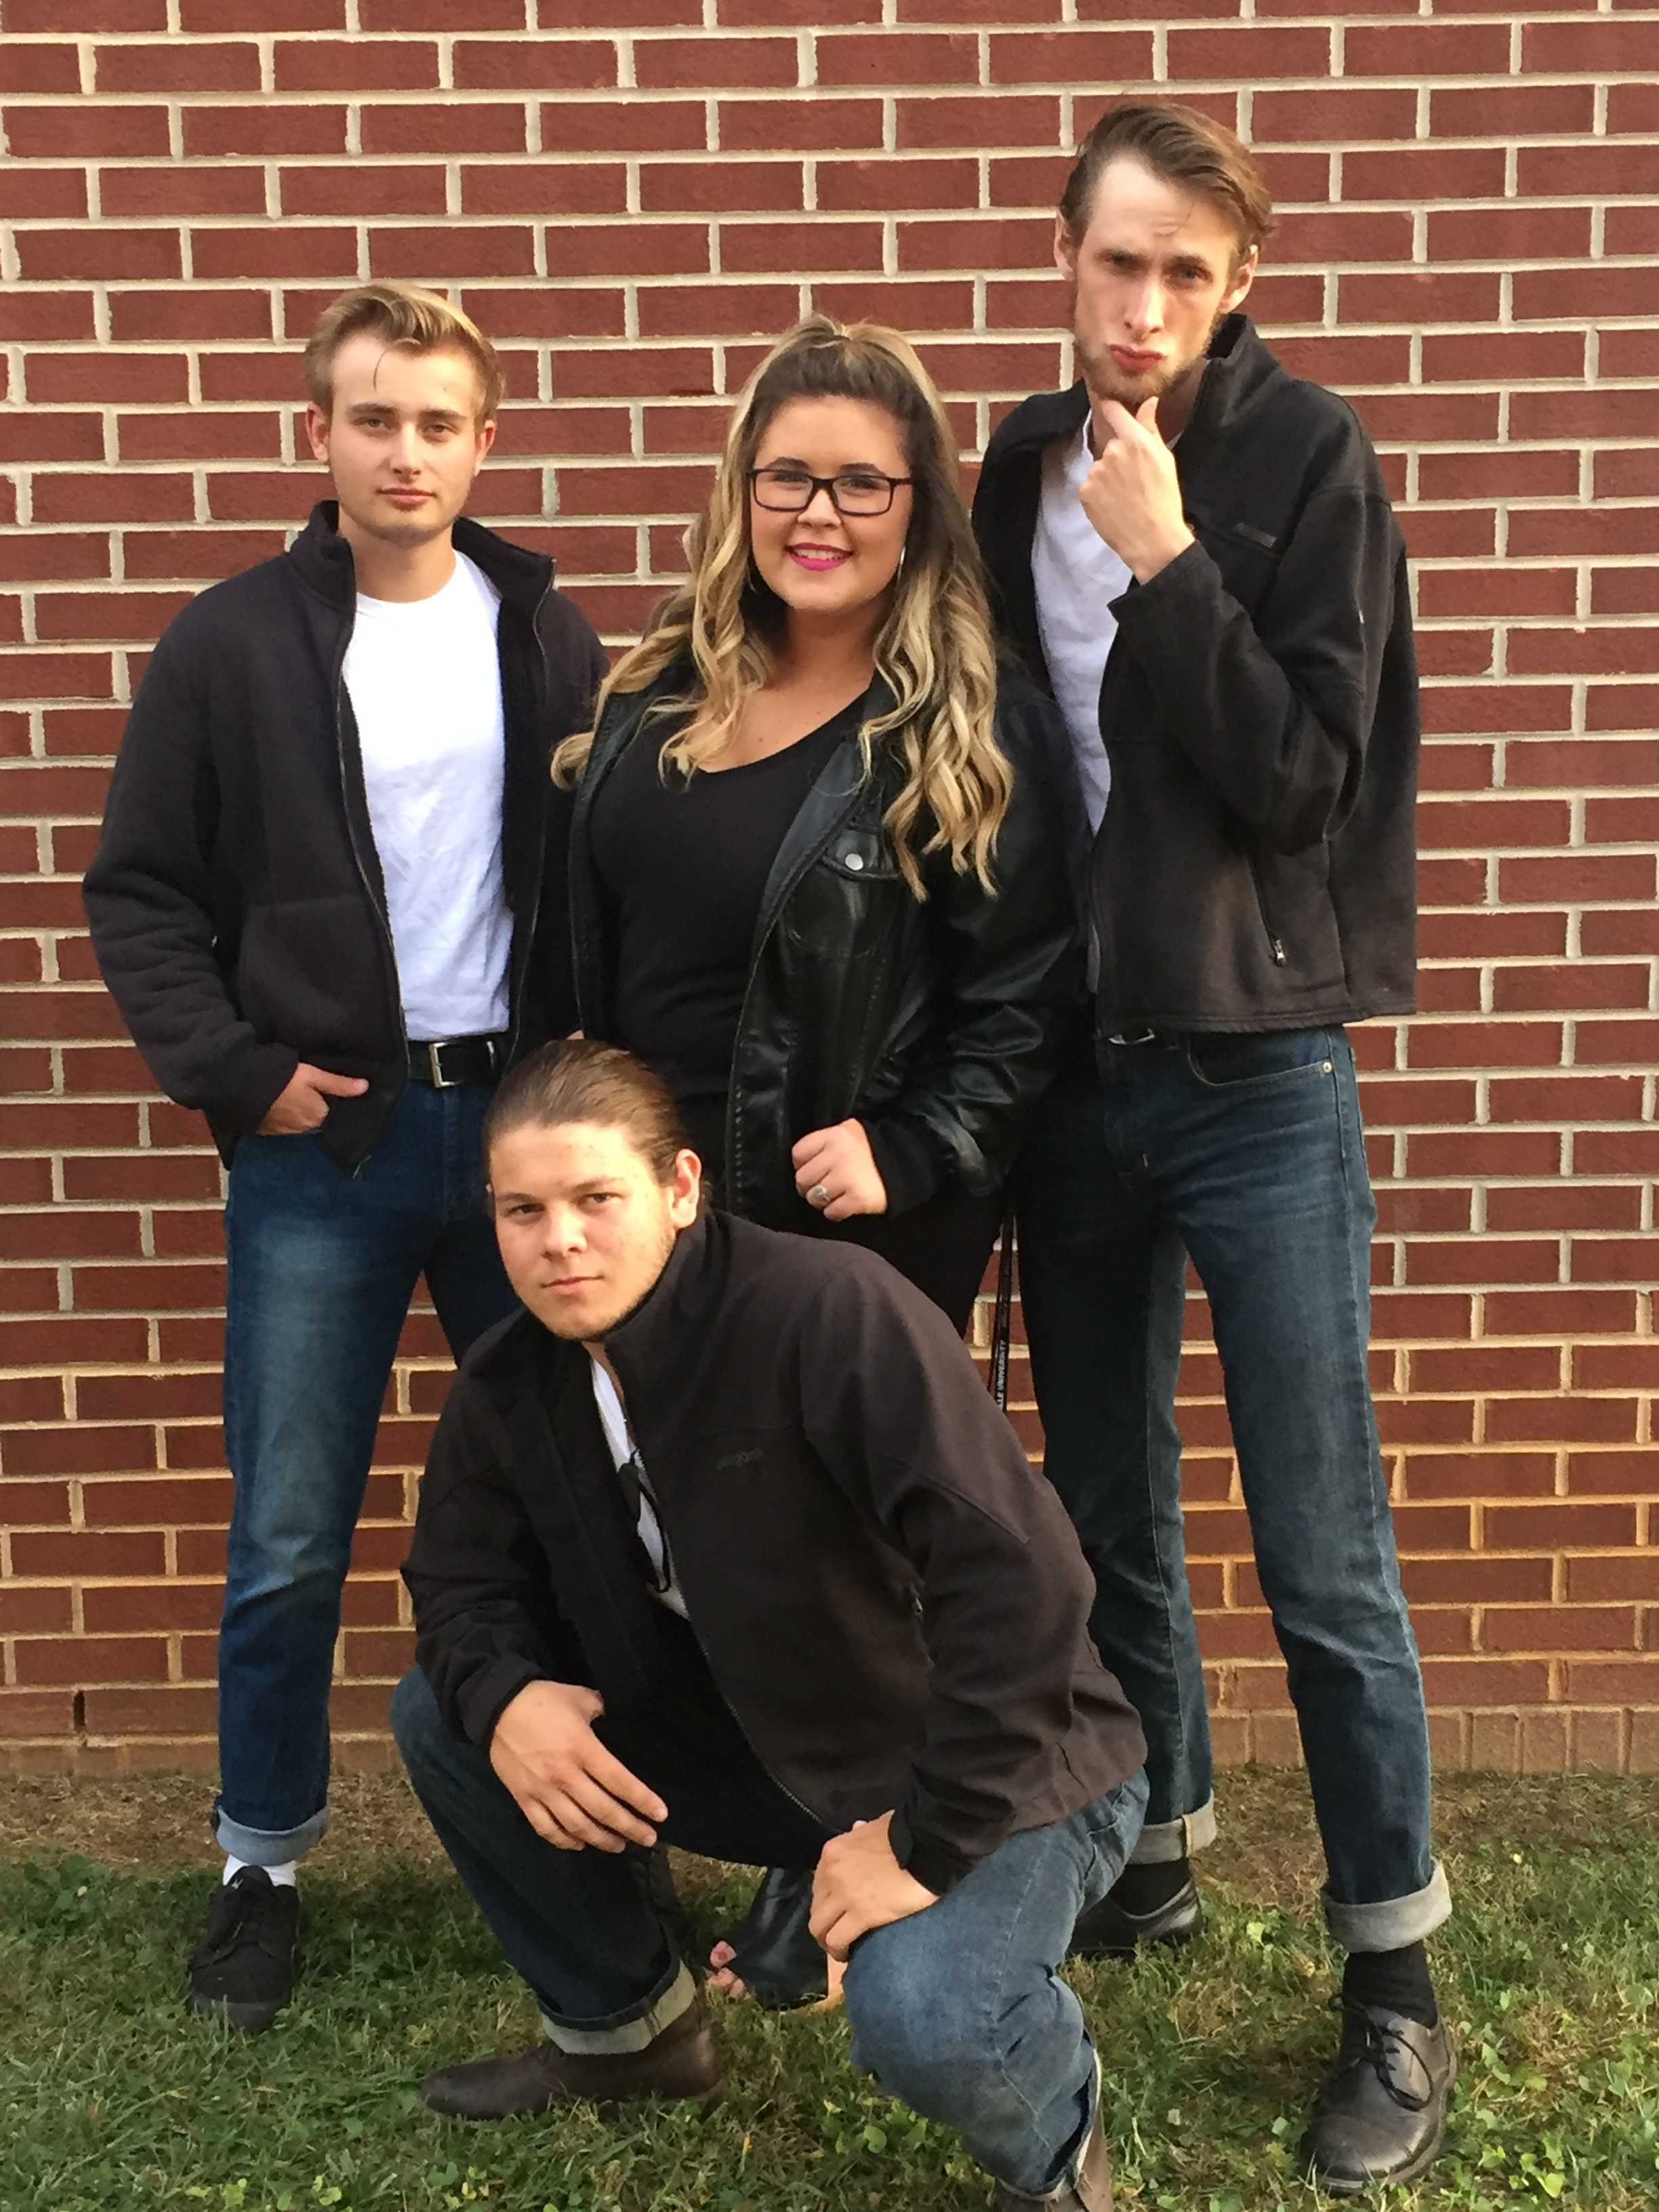 Ross Smith (junior), Andrew Kneece (junior), Cameron Burroughs (junior), and Cody Pendarvis (junior) dress as characters from the movie Grease.